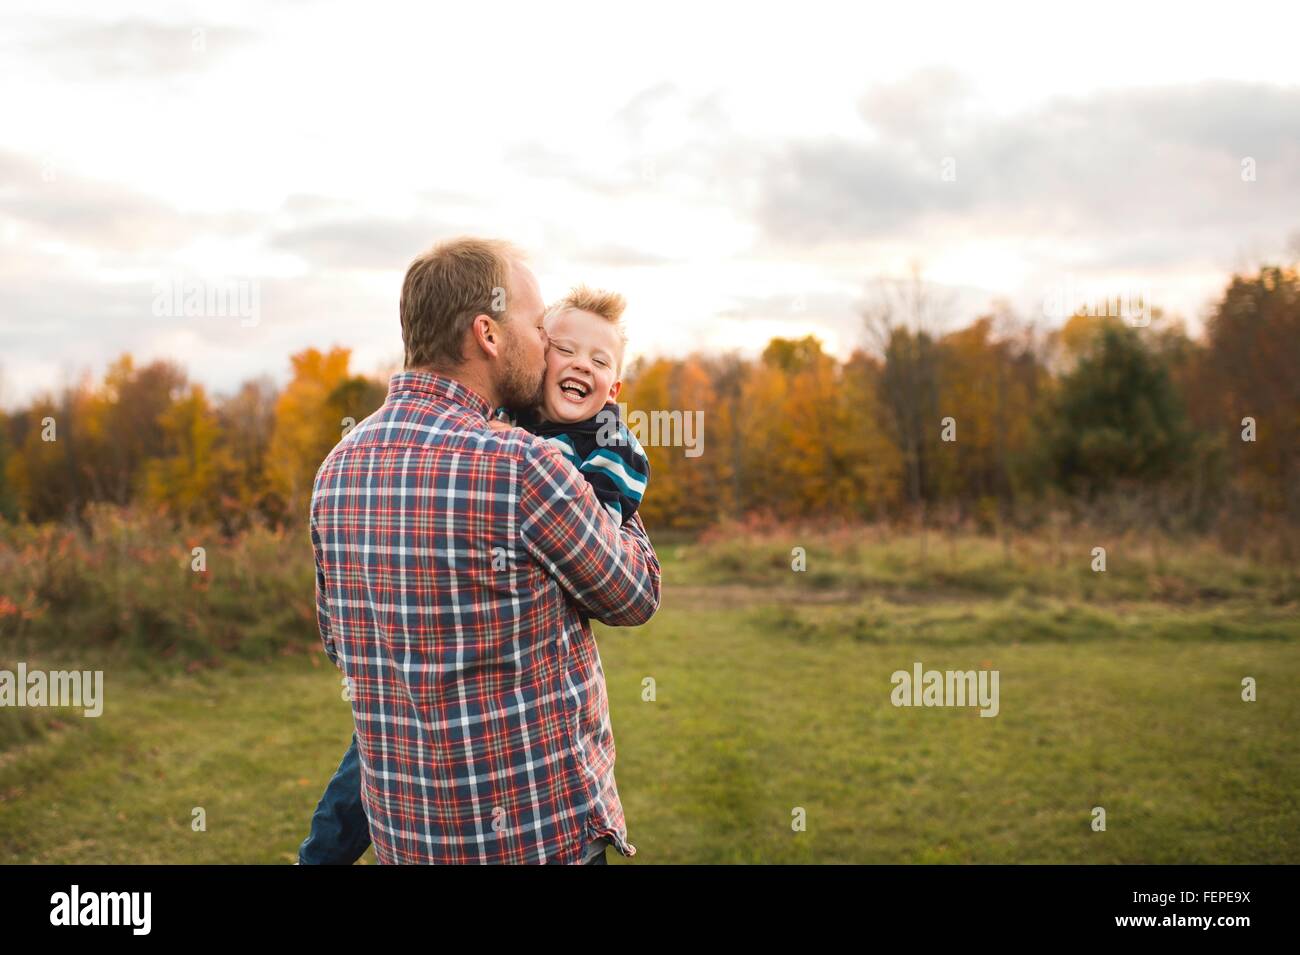 Rear view of father carrying smiling son, kissing him on cheek Stock Photo